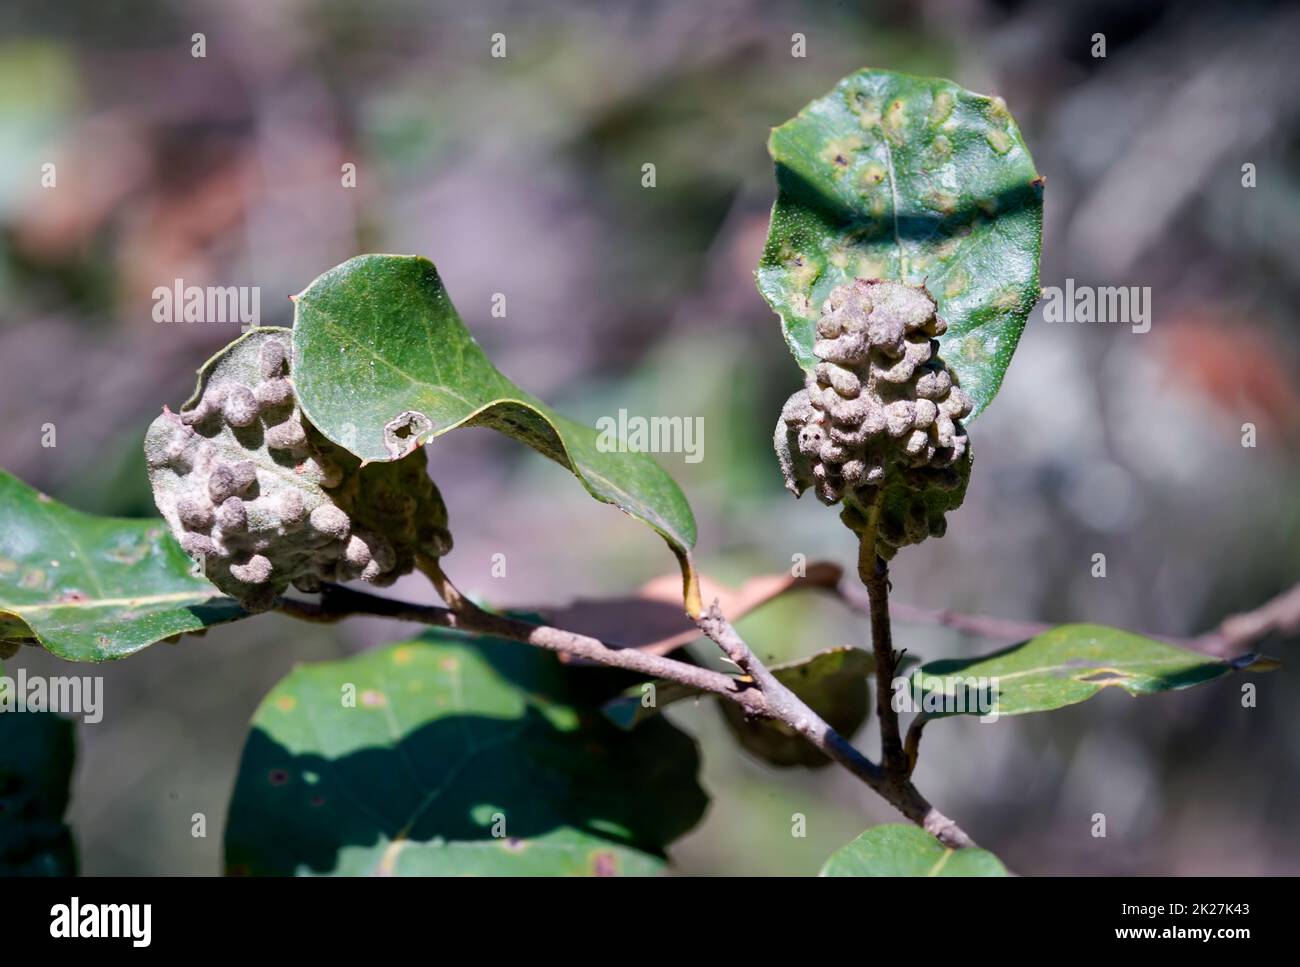 Insects have nested in the leaves of a tree and left their offspring. Stock Photo